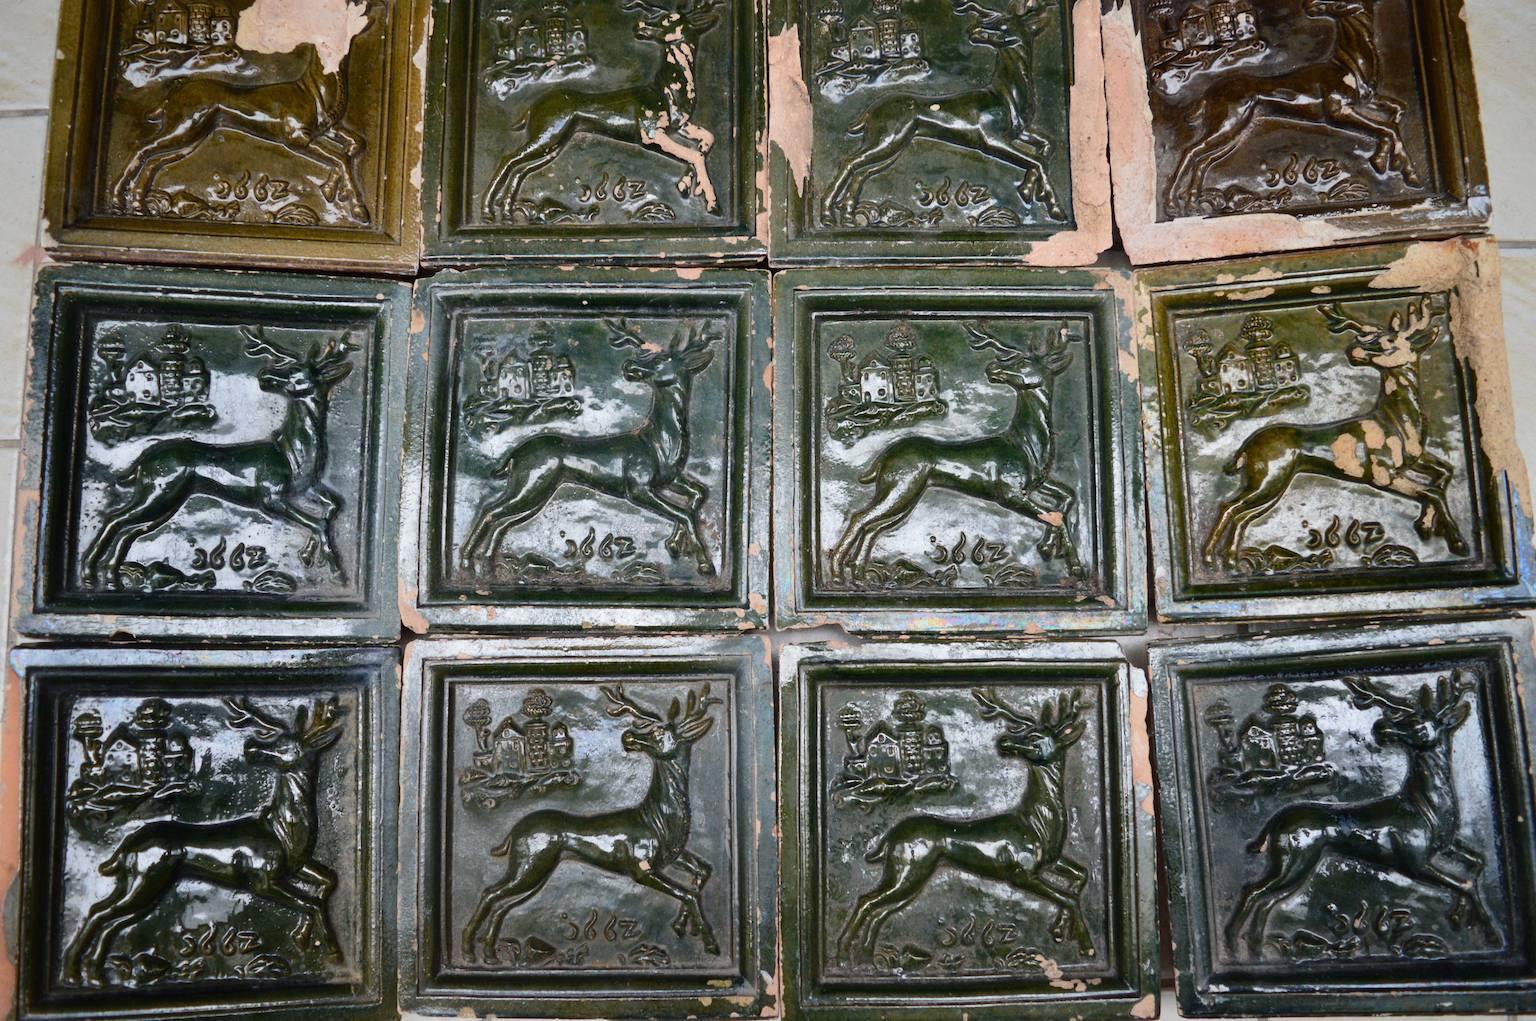 This antique chimney surround is made of 12 glazed green terracotta tiles with a raised relief design showing a reindeer, castle and the date 1667. Stamped on the reverse by the maker 